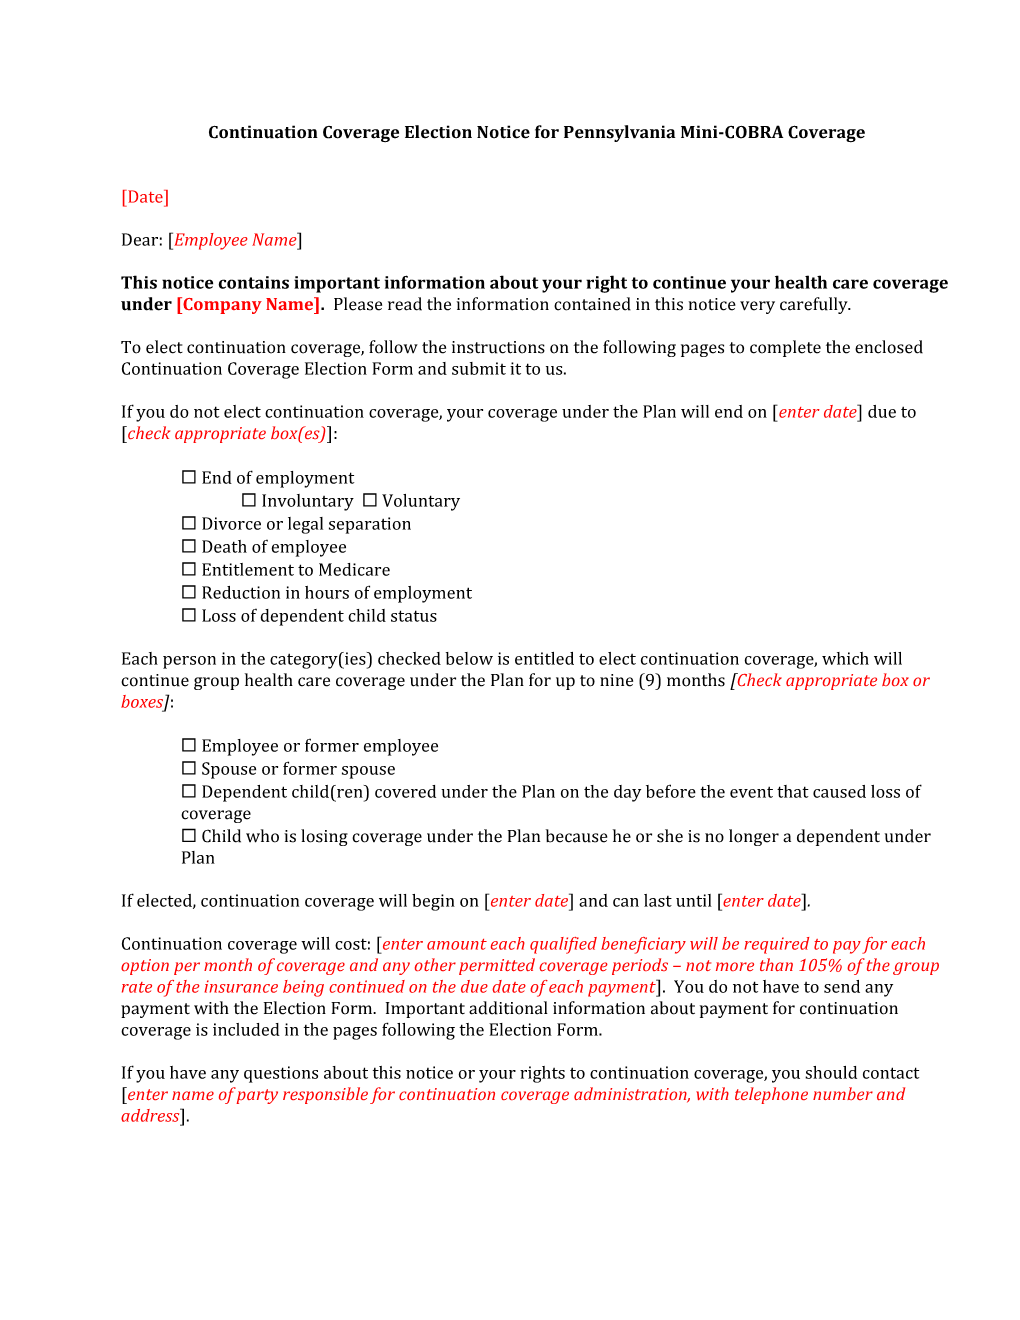 Ÿ Sample PA Continuation Letter (Pg 2) : Complete/Edit As Necessary, Print on Company Letterhead